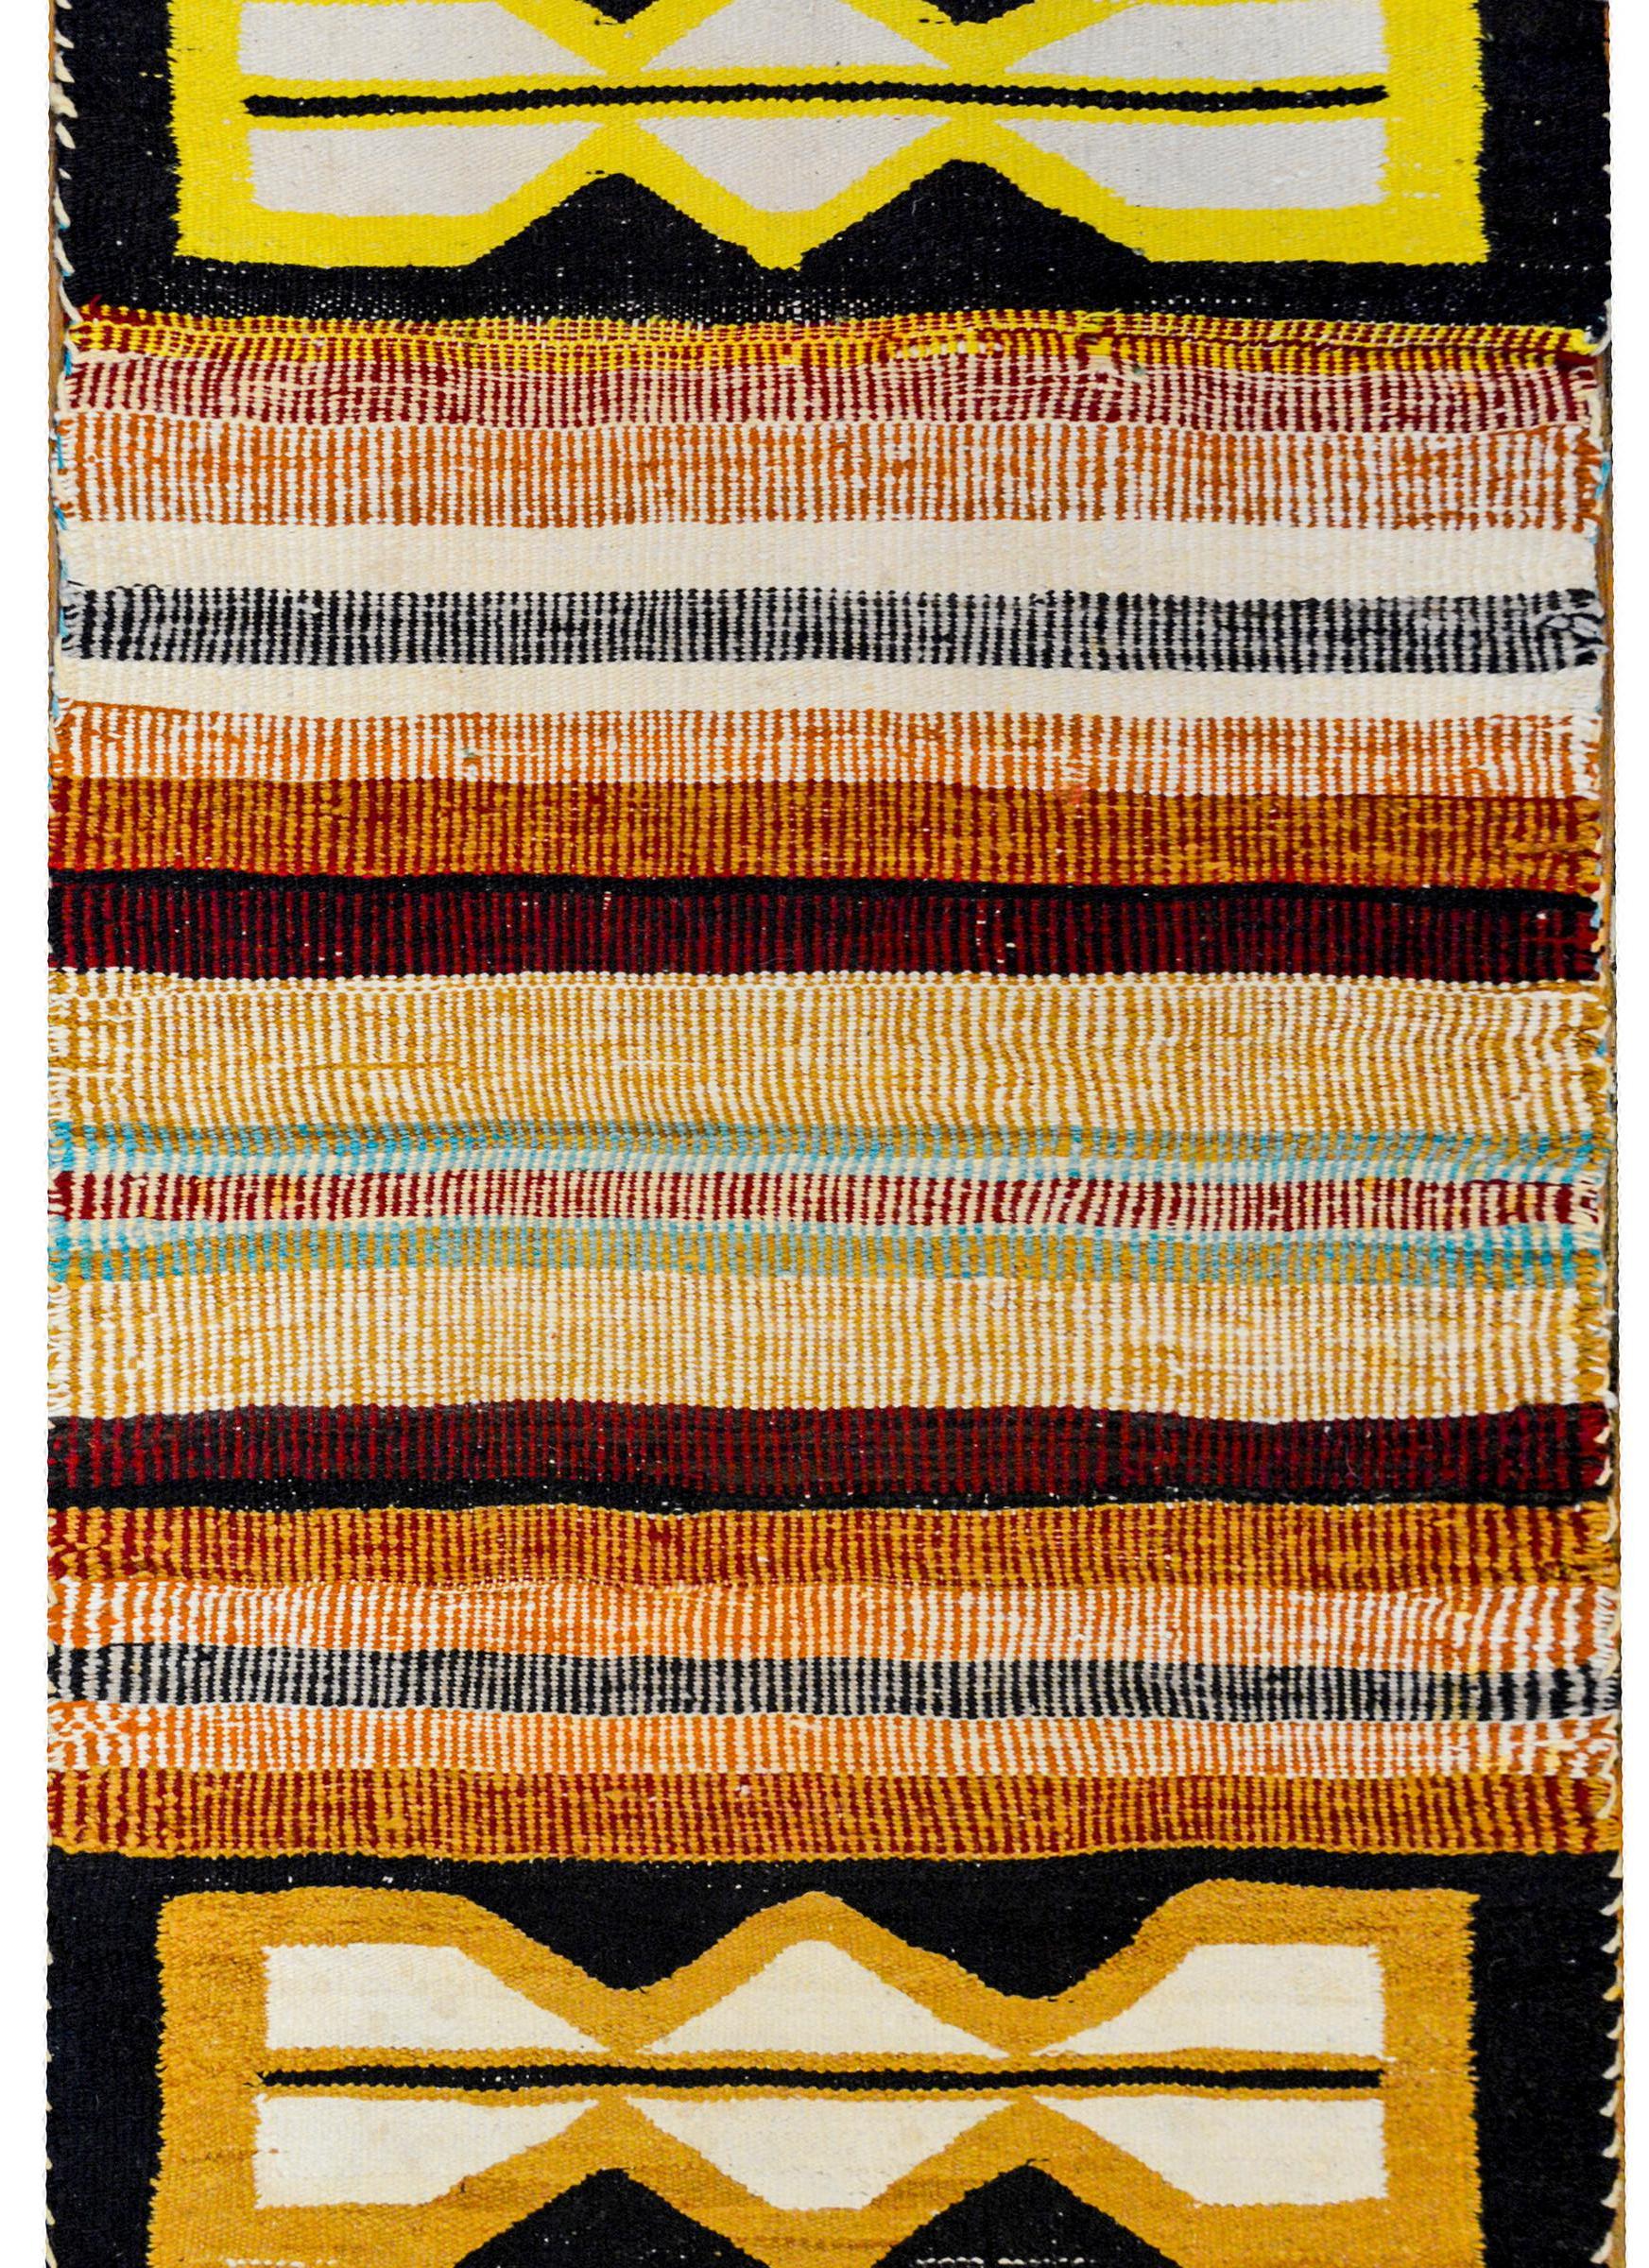 An unusual 20th century Native North American Navajo rug with a wonderful bold striped pattern woven in natural rust, green, gold, deep red, and white colors, with two large geometric patterned shapes on each end.